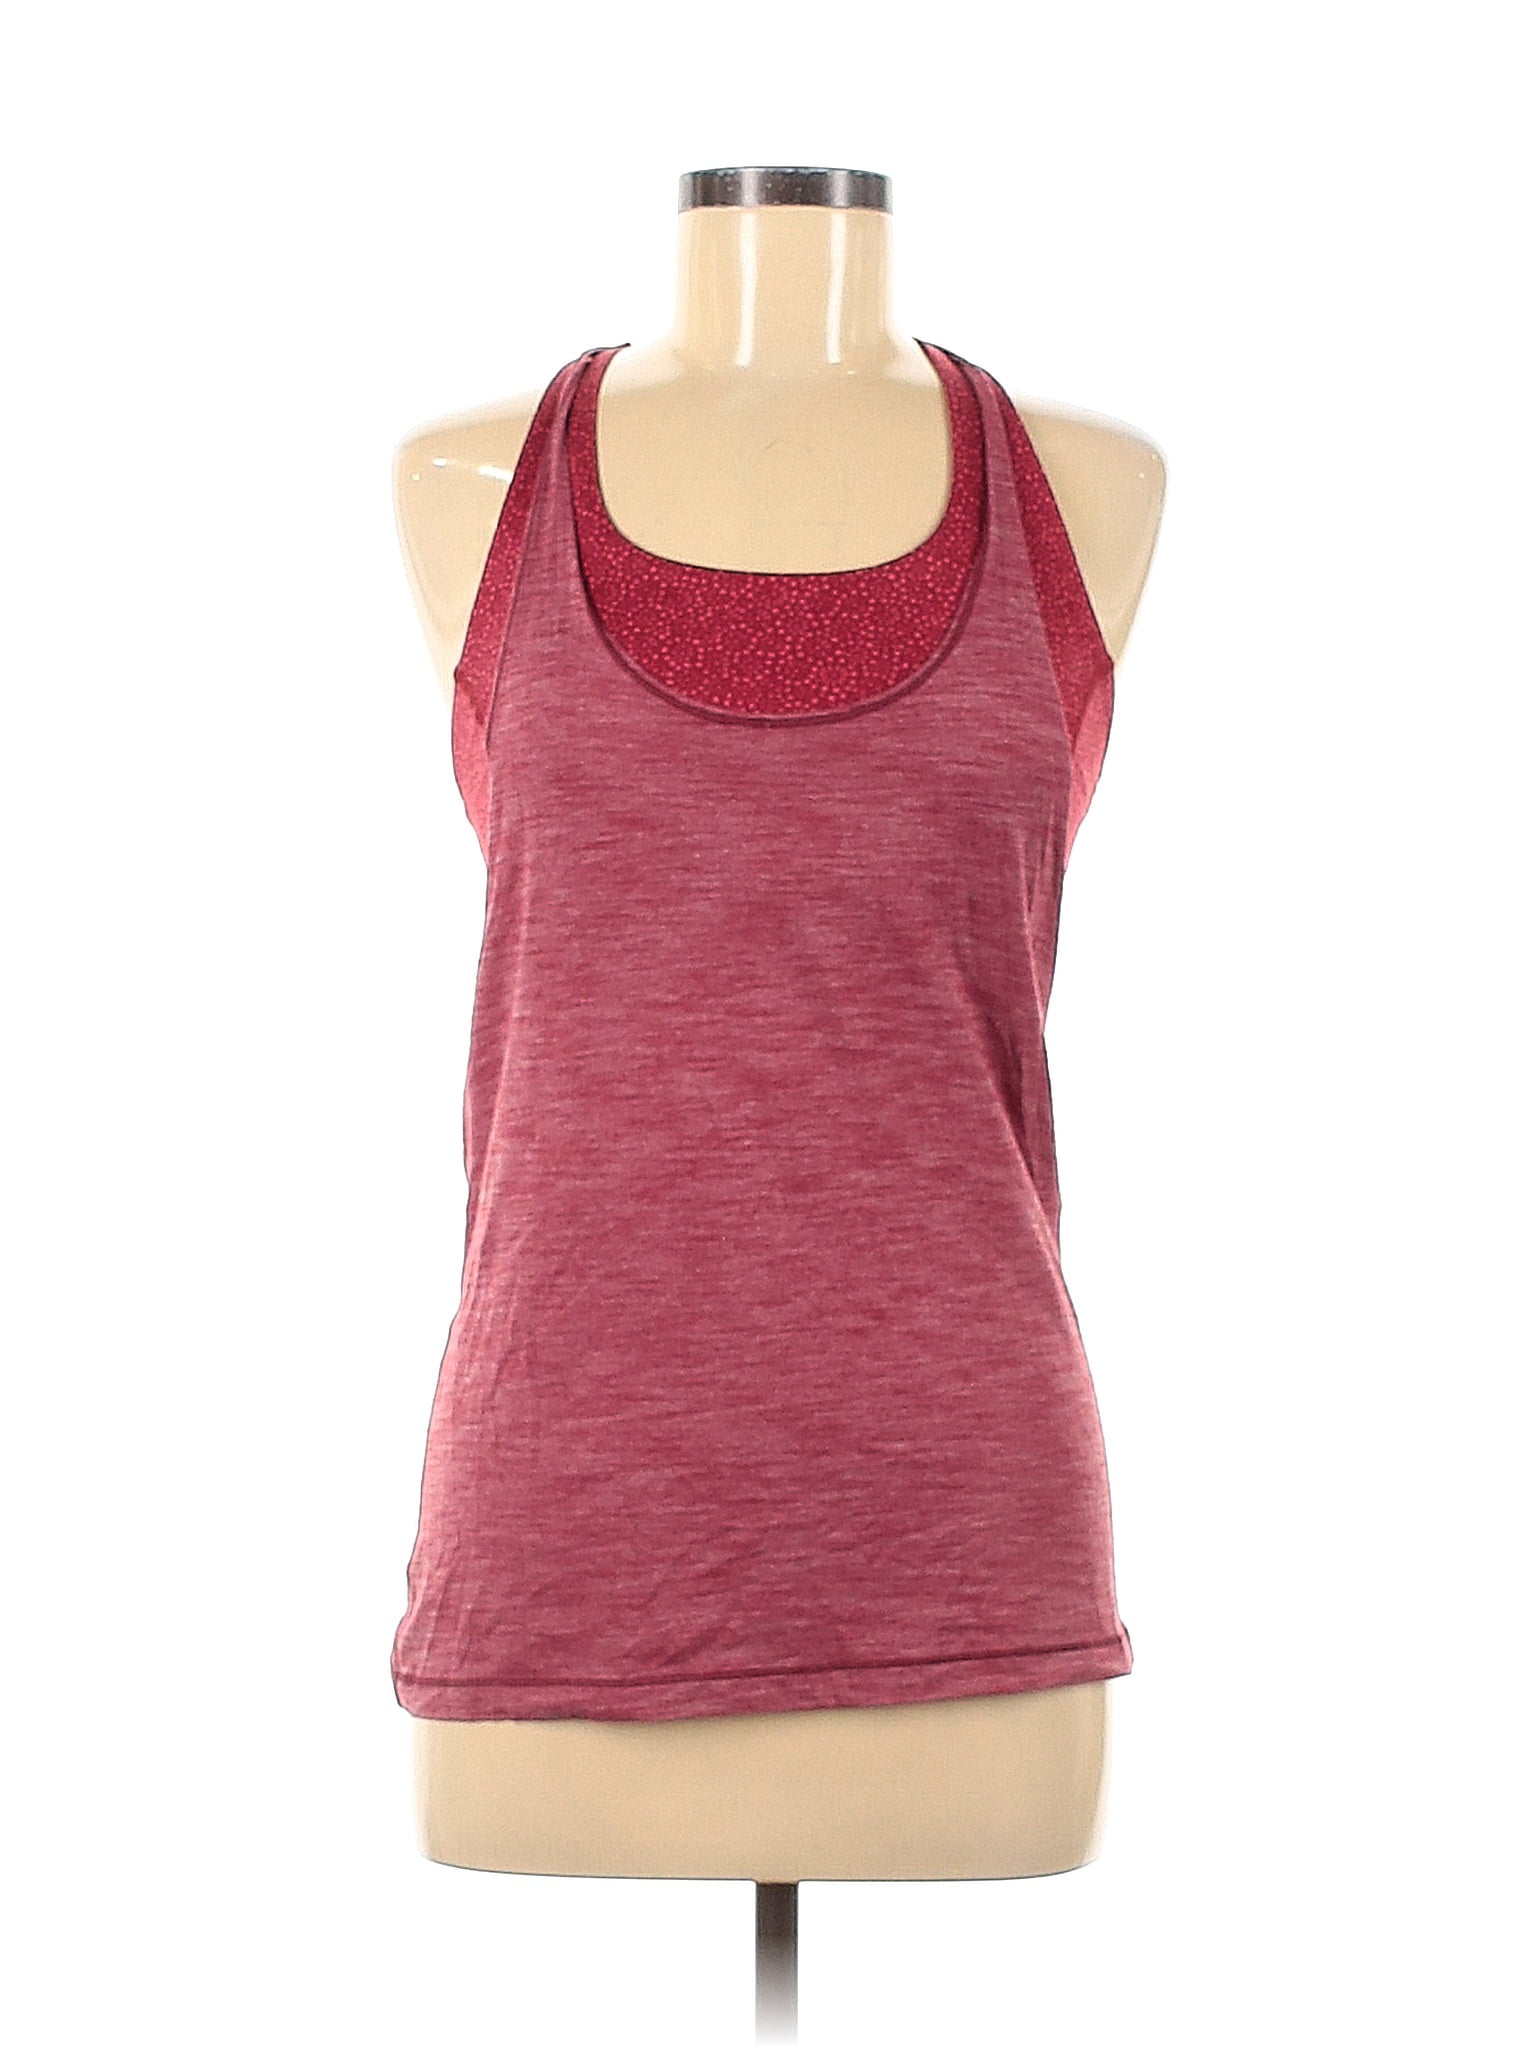 Pre-Owned Lululemon Athletica Womens Size 6 Active Nigeria